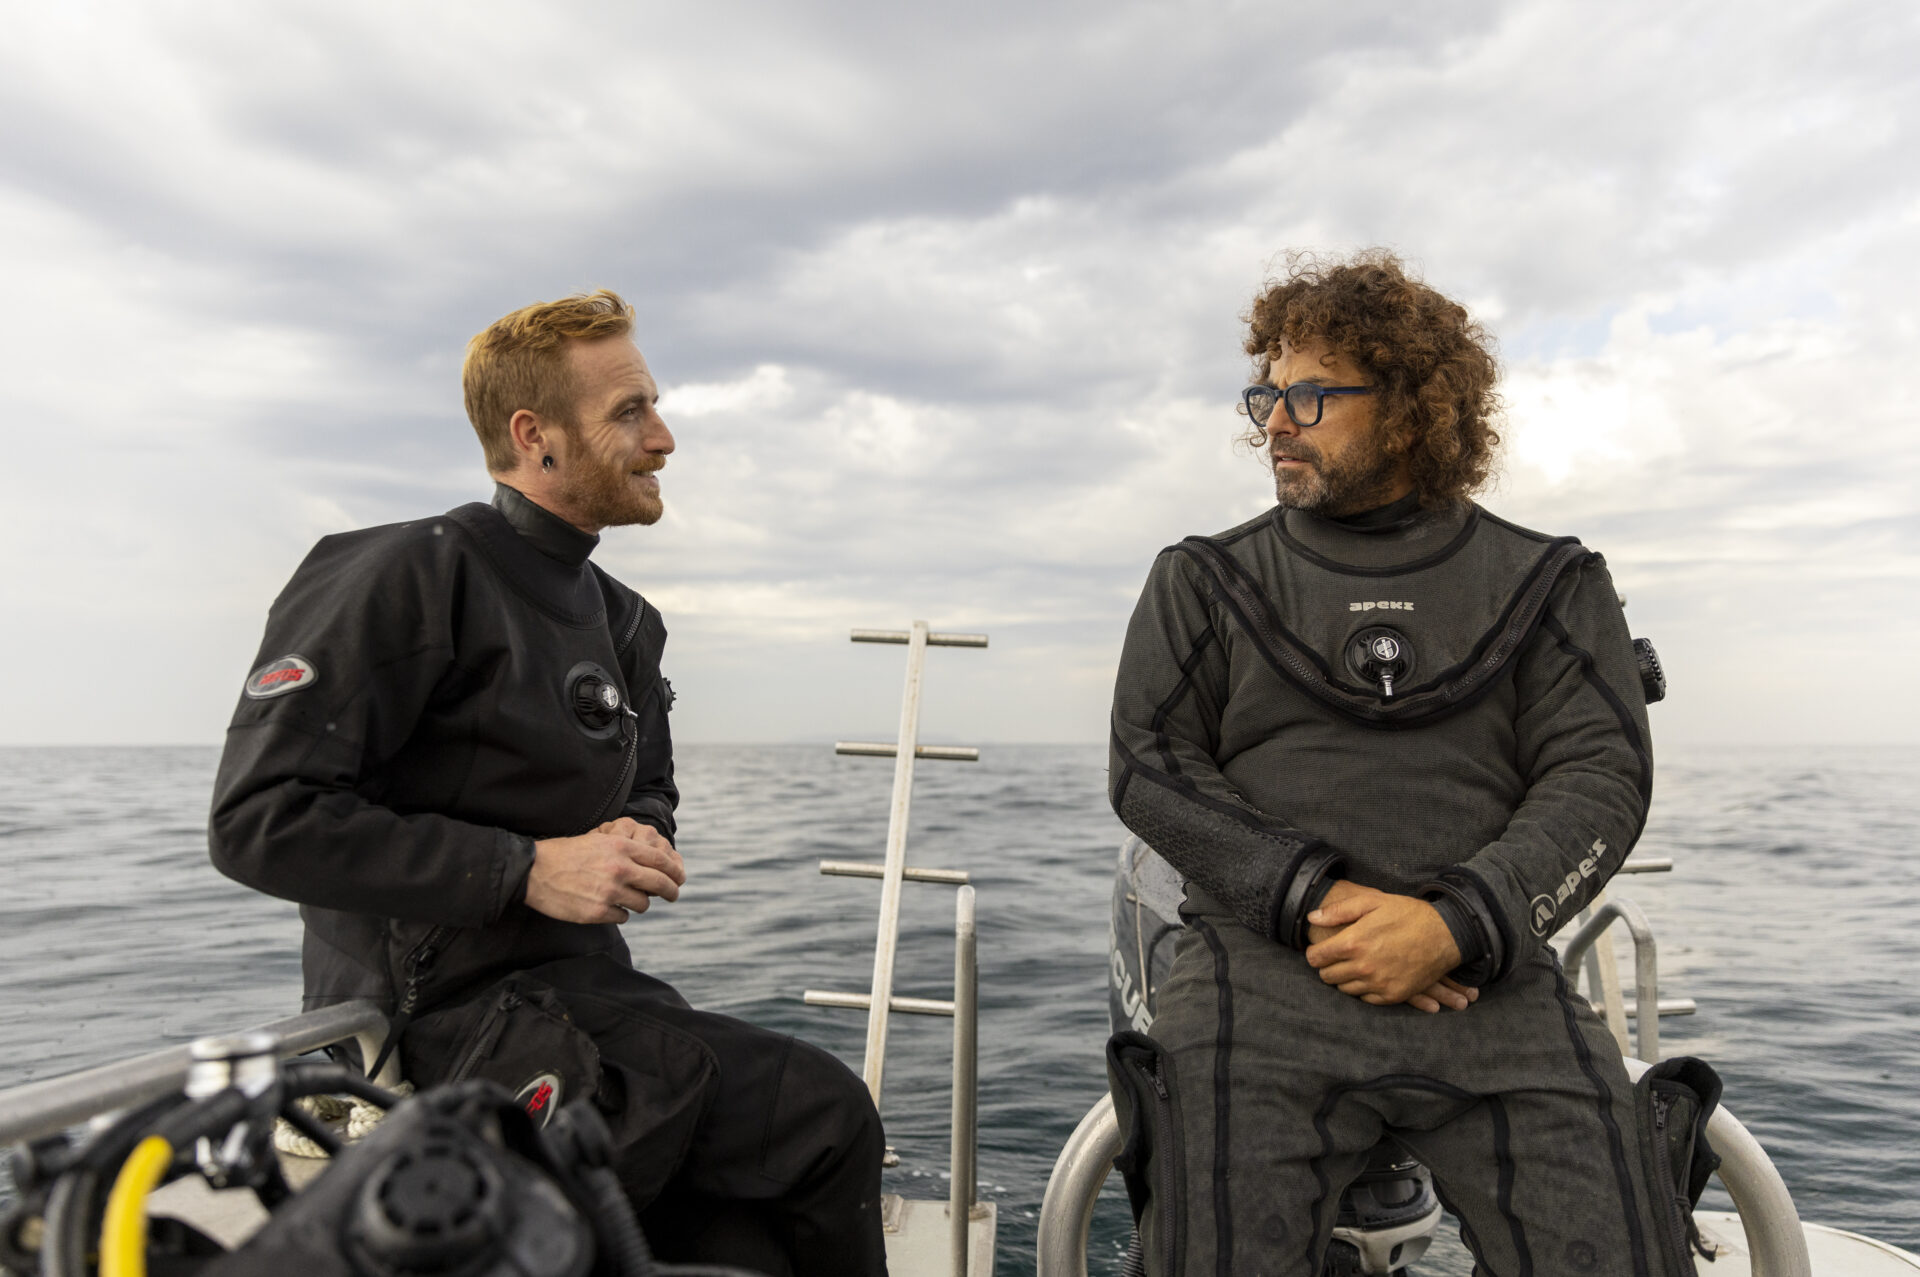 Jan Verbeek, scientific manager and marine biologist at SeaForester (left), discusses diving logistics with João Franco, marine Ecologist at the Marine and Environmental Sciences Centre in Peniche, Portugal. (Photo courtesy Jan Verbeek)